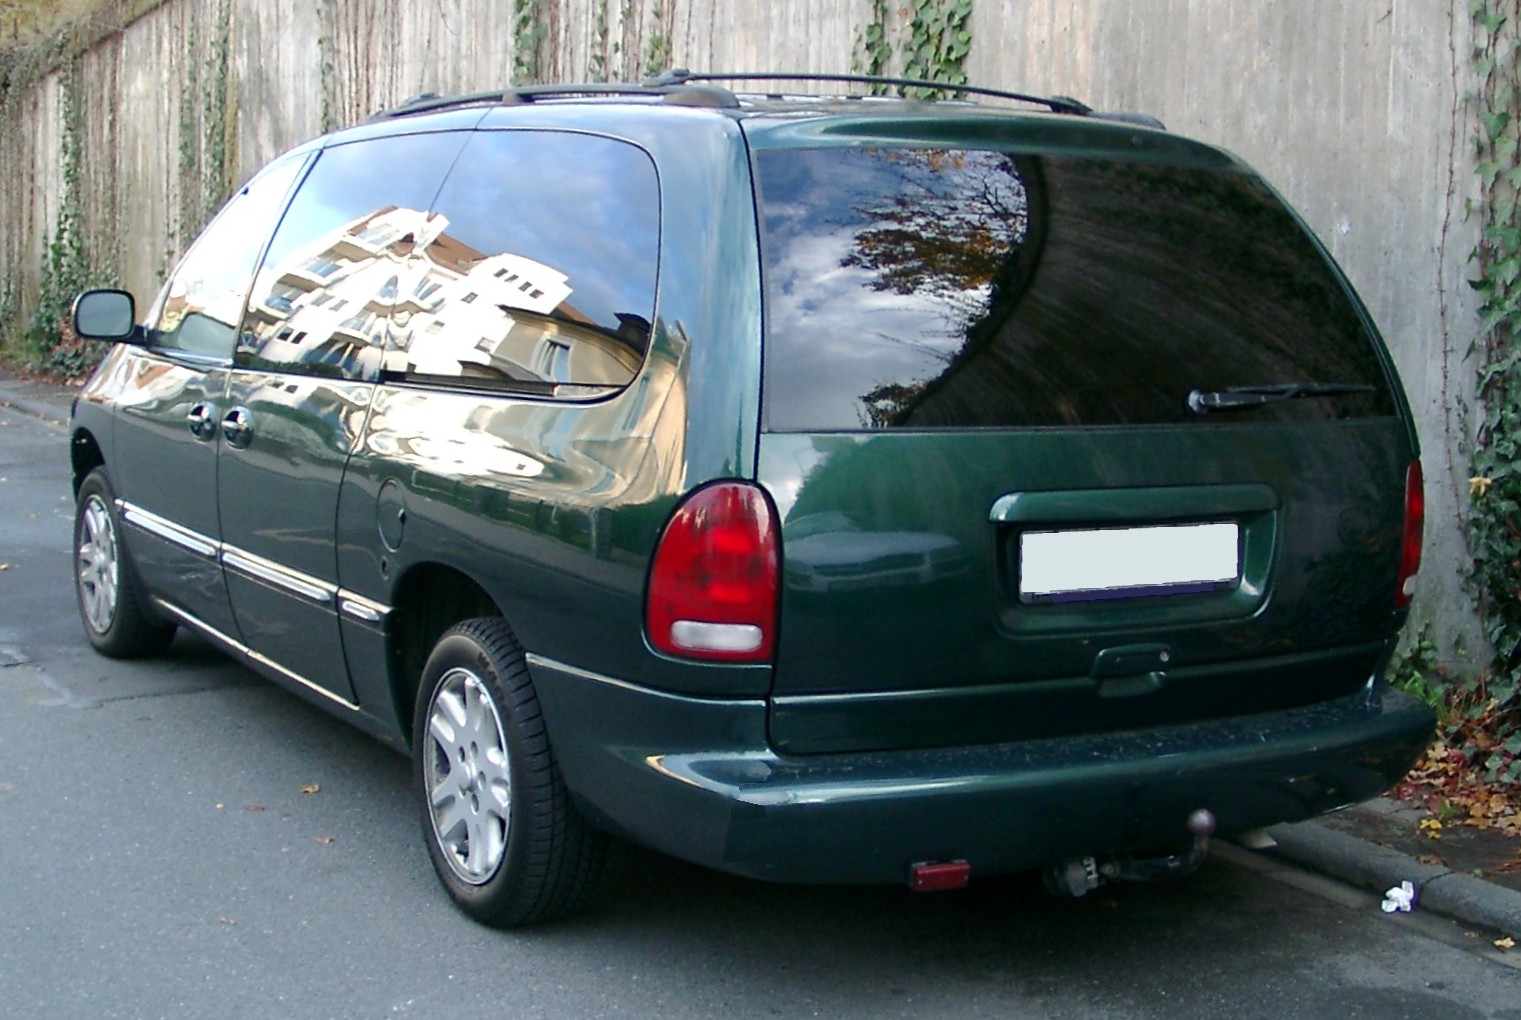 2003 Chrysler Voyager VIN Number Search AutoDetective